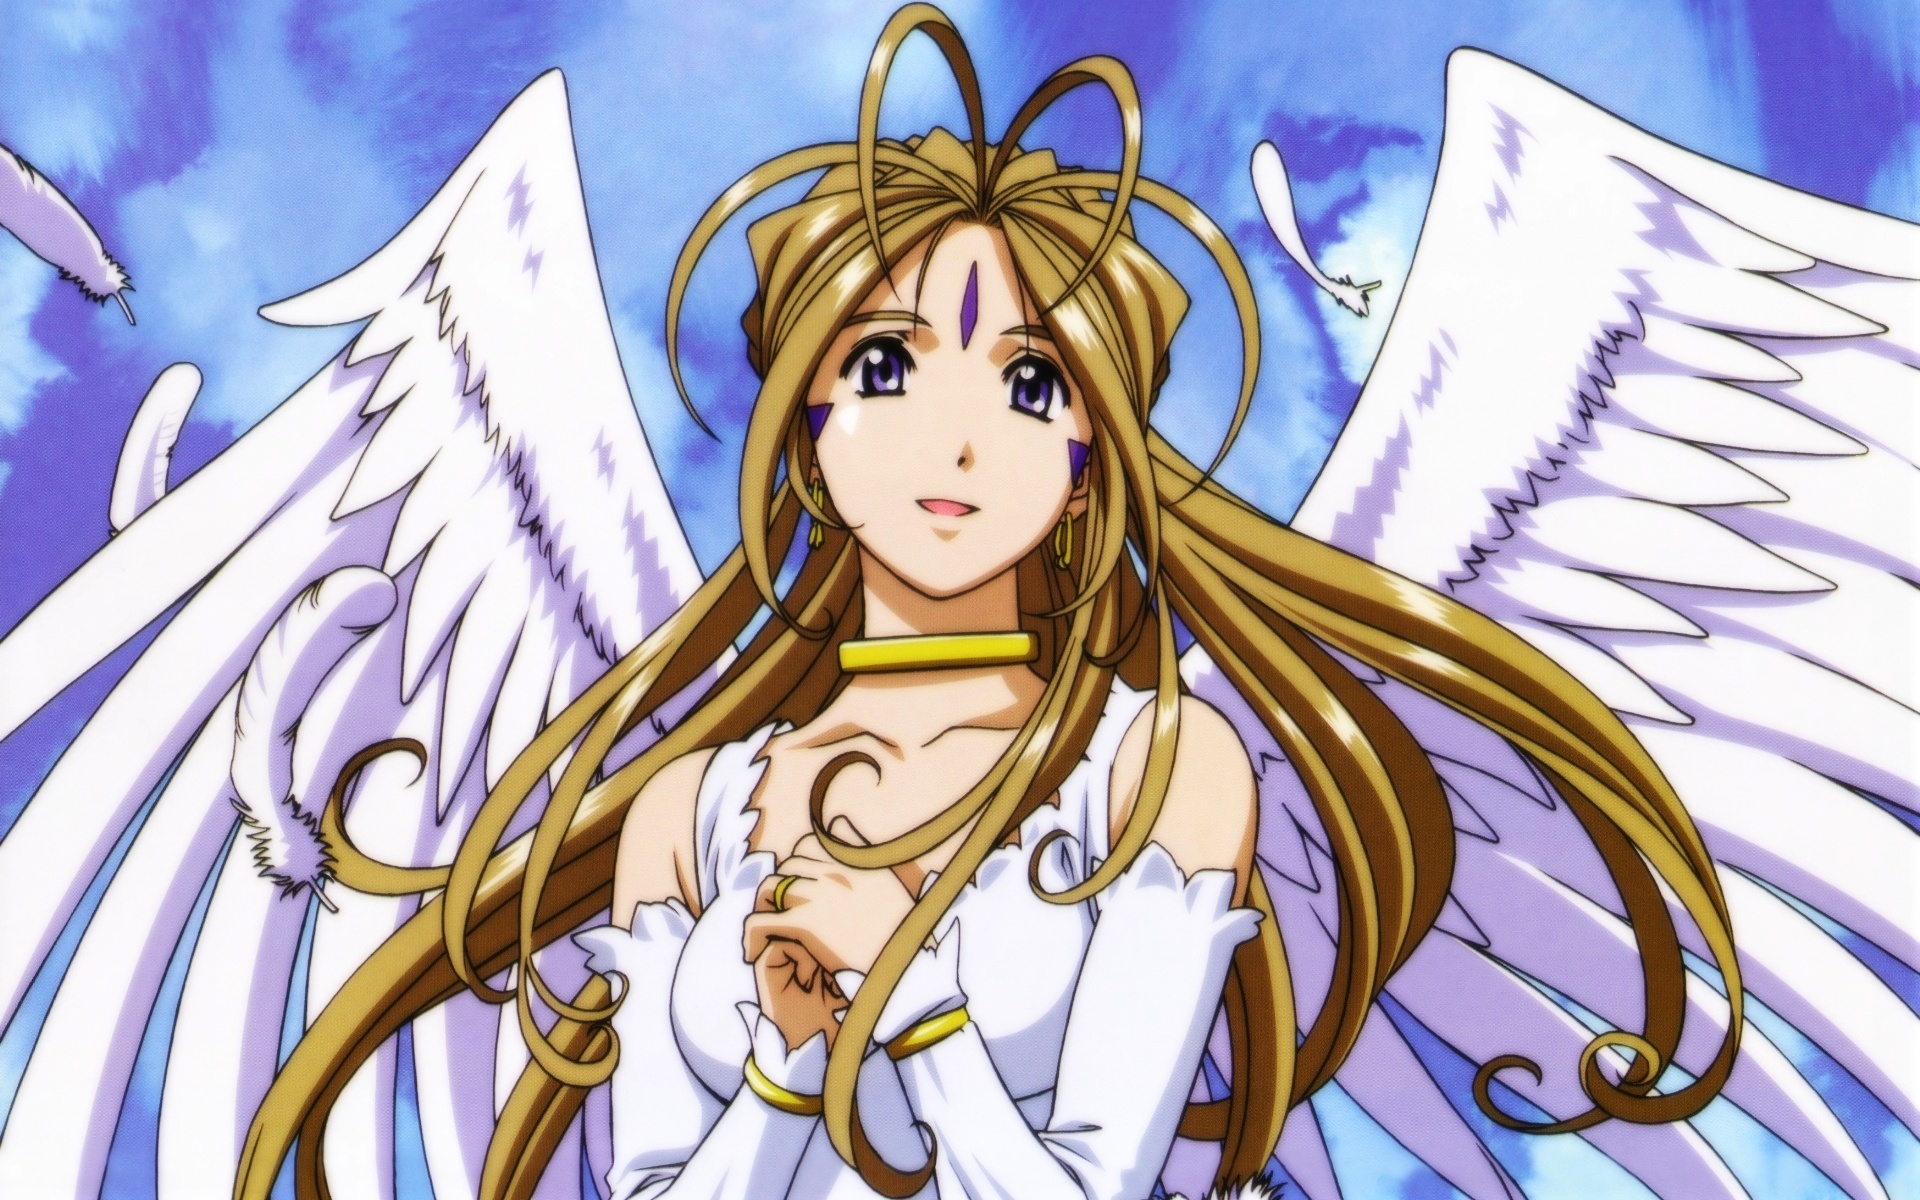 Belldandy, an anime character from Ah! My Goddess, surrounded by vibrant colors and a serene ambiance.